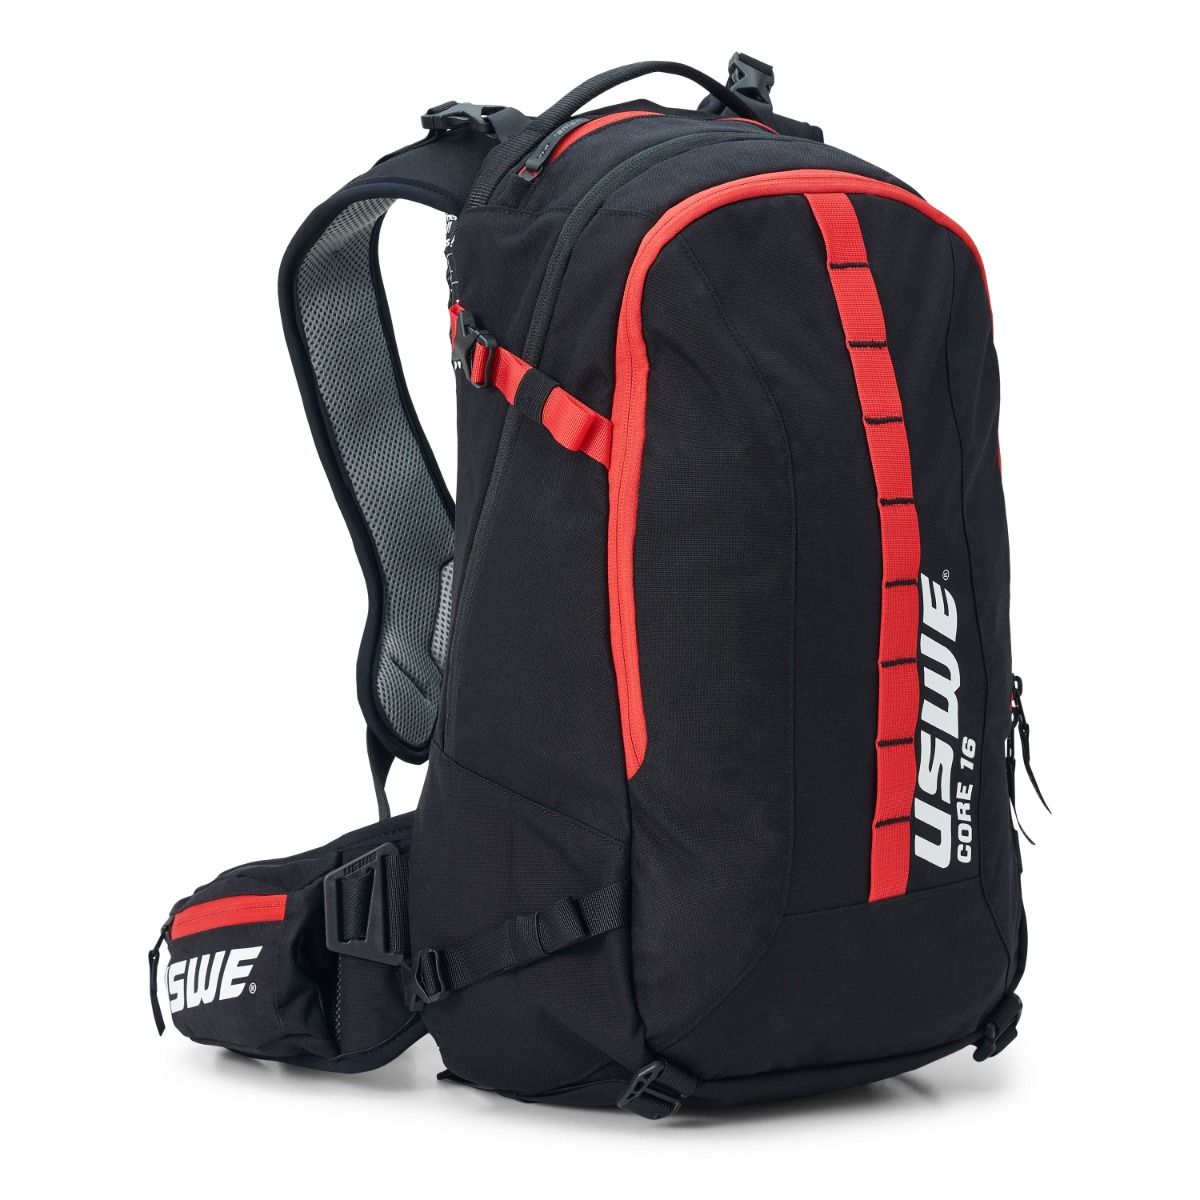 USWE Core 16 Hydration Pack - Black - Red - 16L Pack - 3.0L Bladder (Not Included)